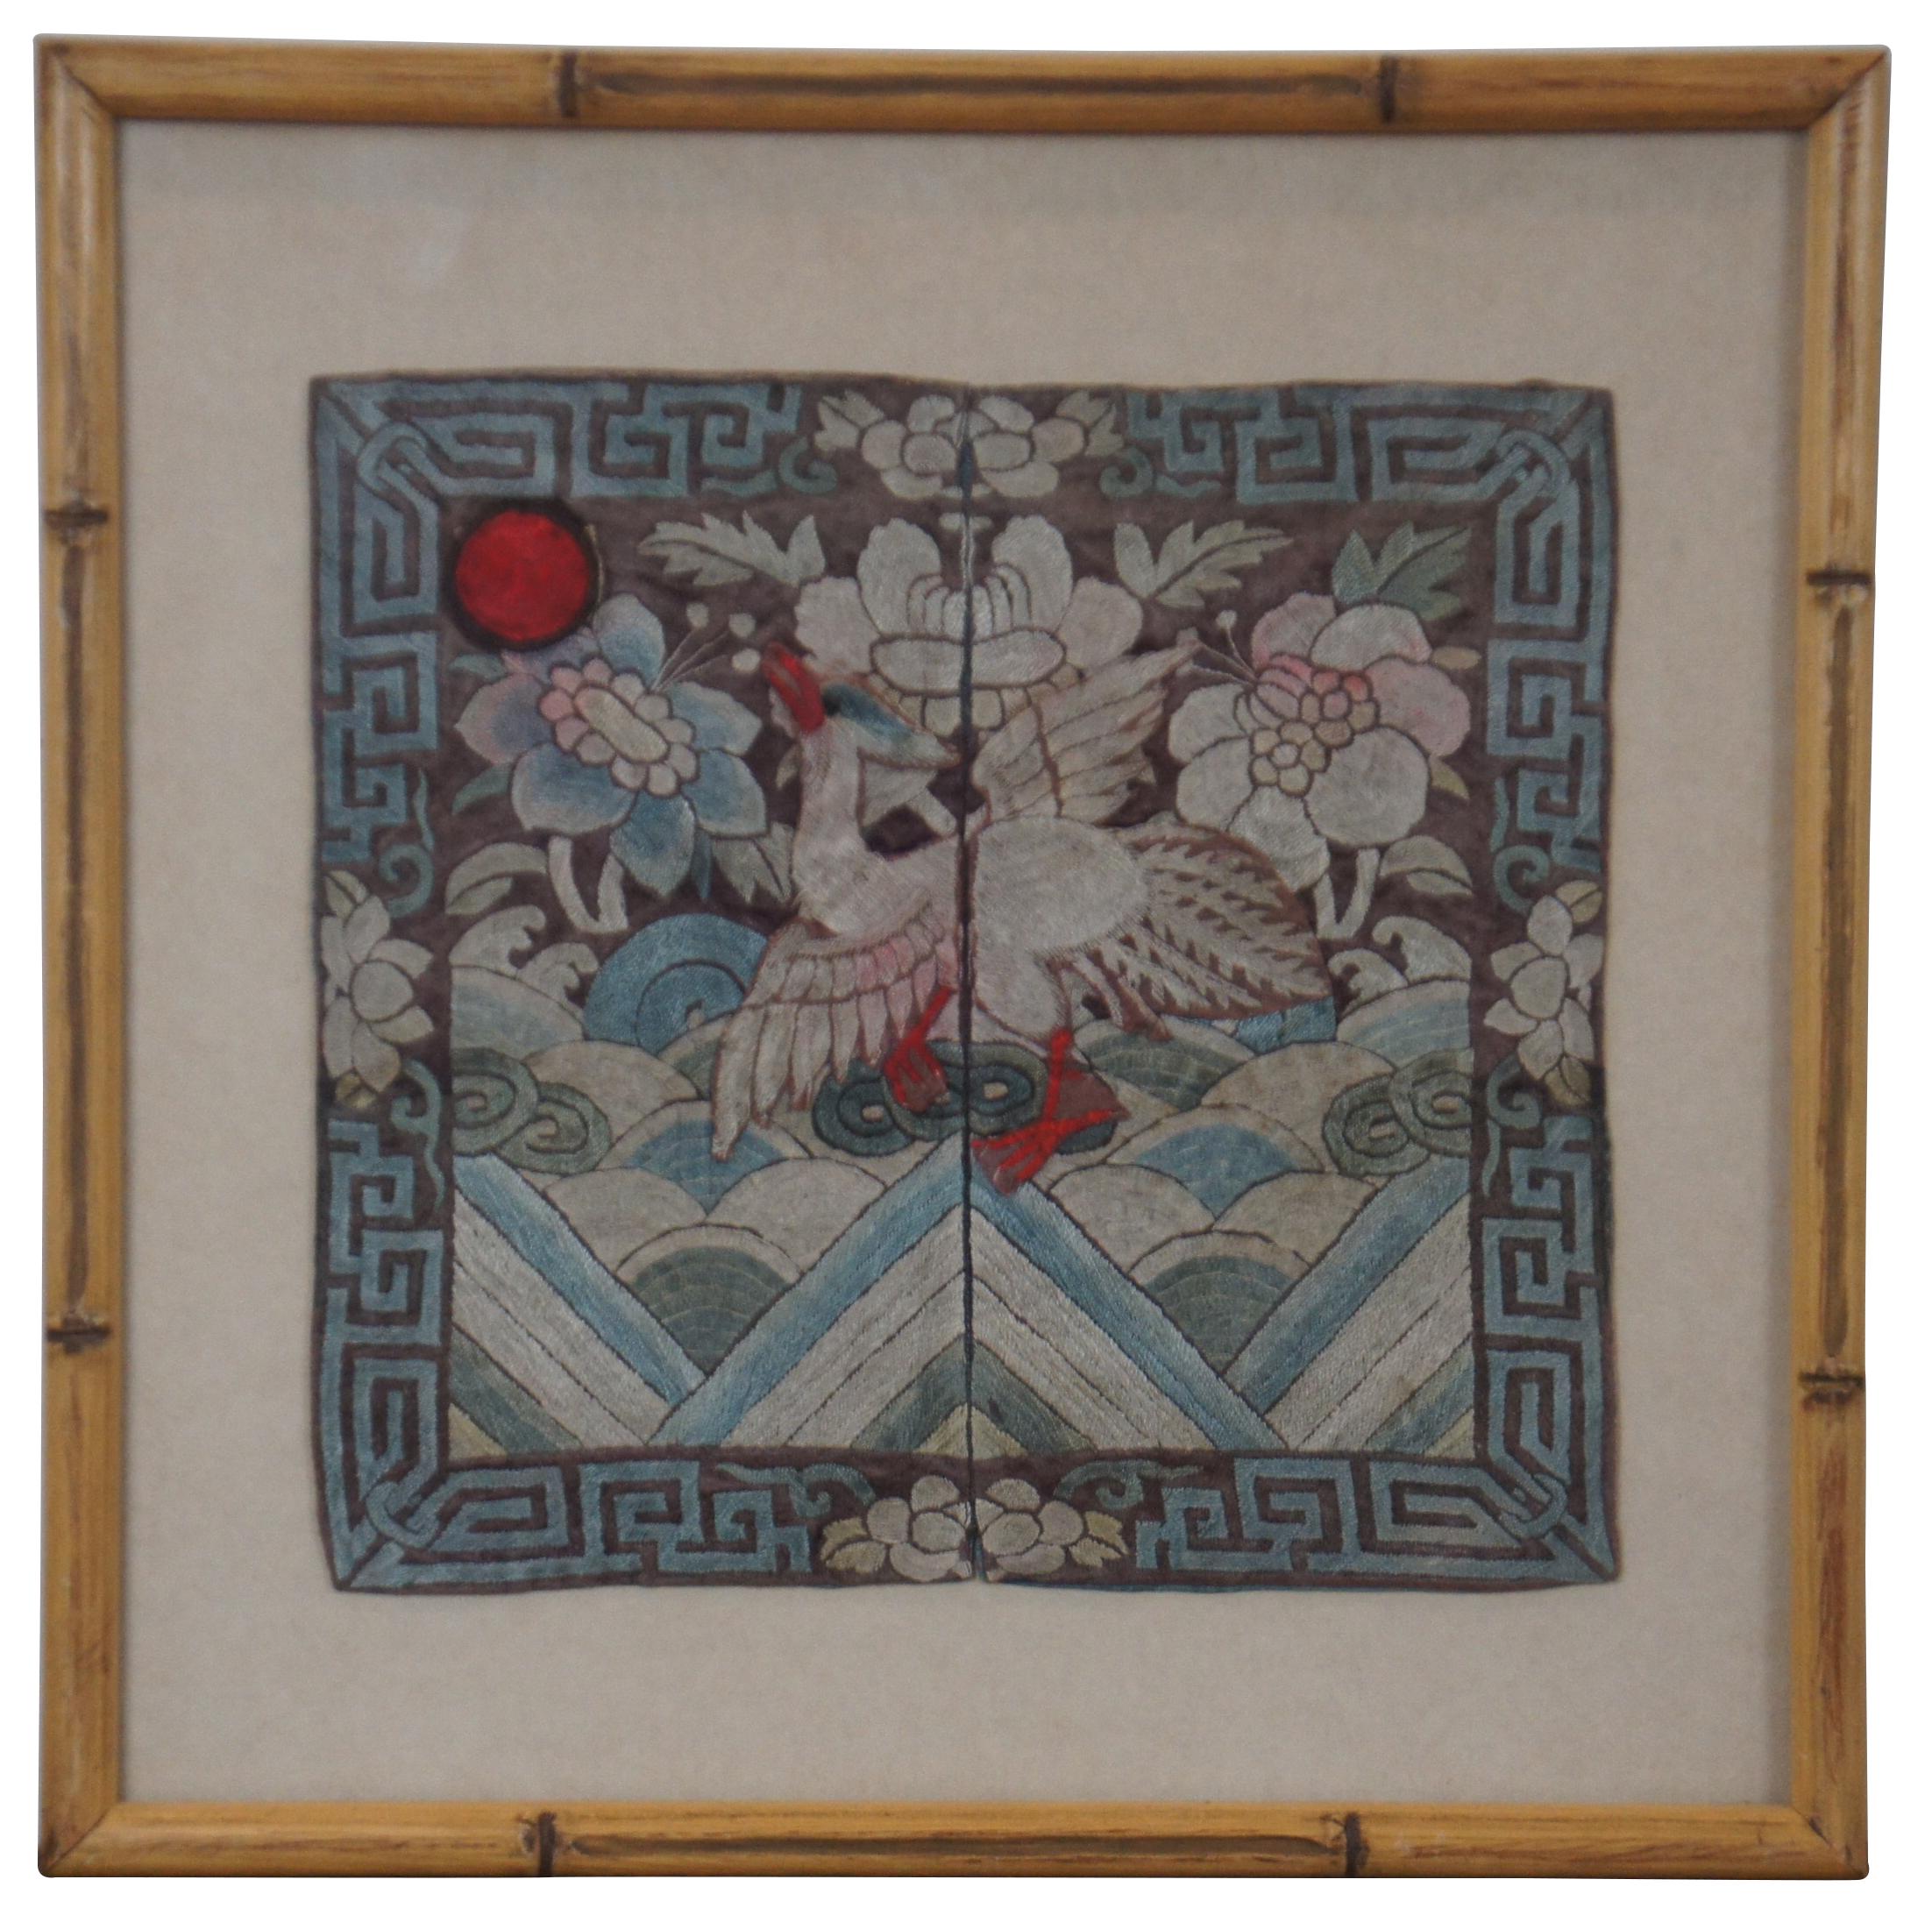 Pair of antique Chinese Qing Dynasty silk textile / tapestry court rank military buzi badges or panels embroidered with a scene of a dancing Manchurian Crane / bird in front of flowers, looking towards a red sun. Framed in faux bamboo.

A mandarin